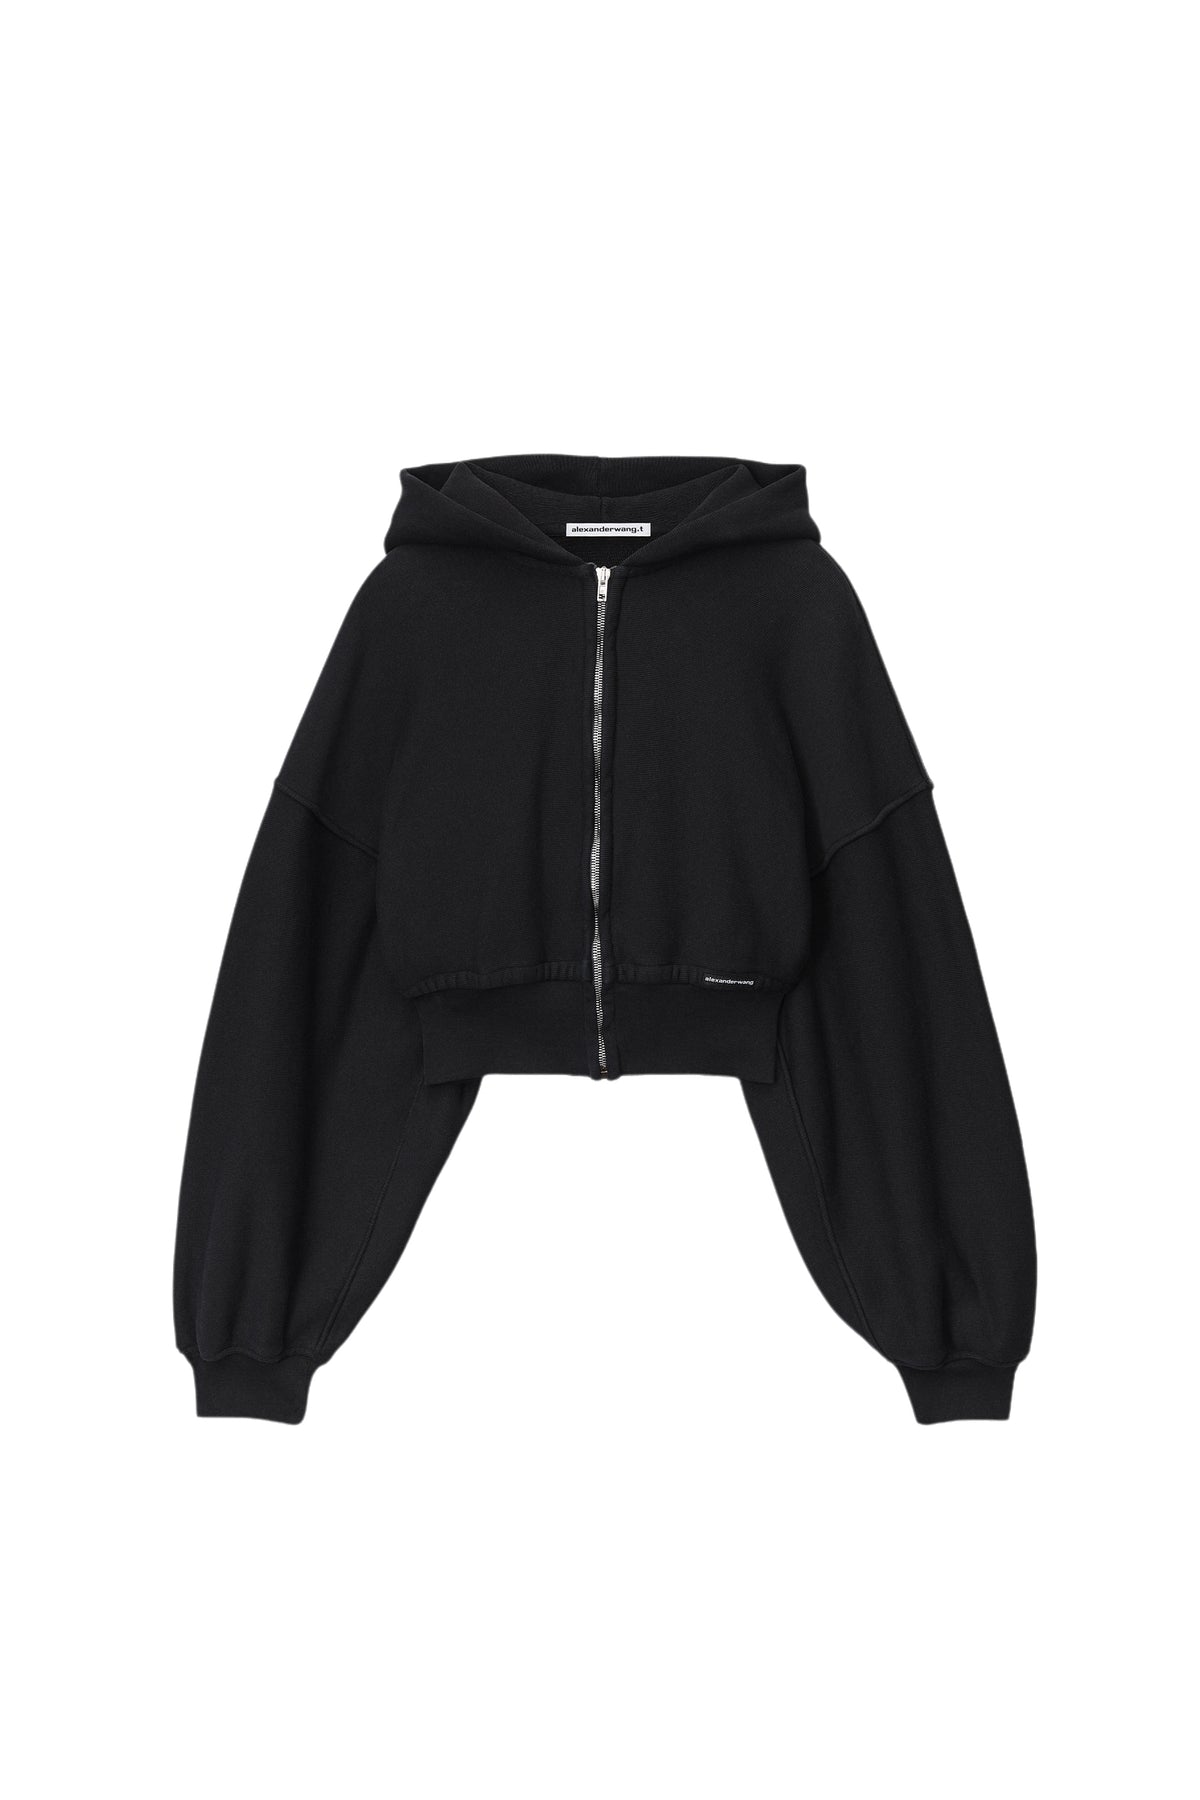 CROPPED ZIP UP HOODIE WITH BRANDED SEAM LABEL / FADED BLACK